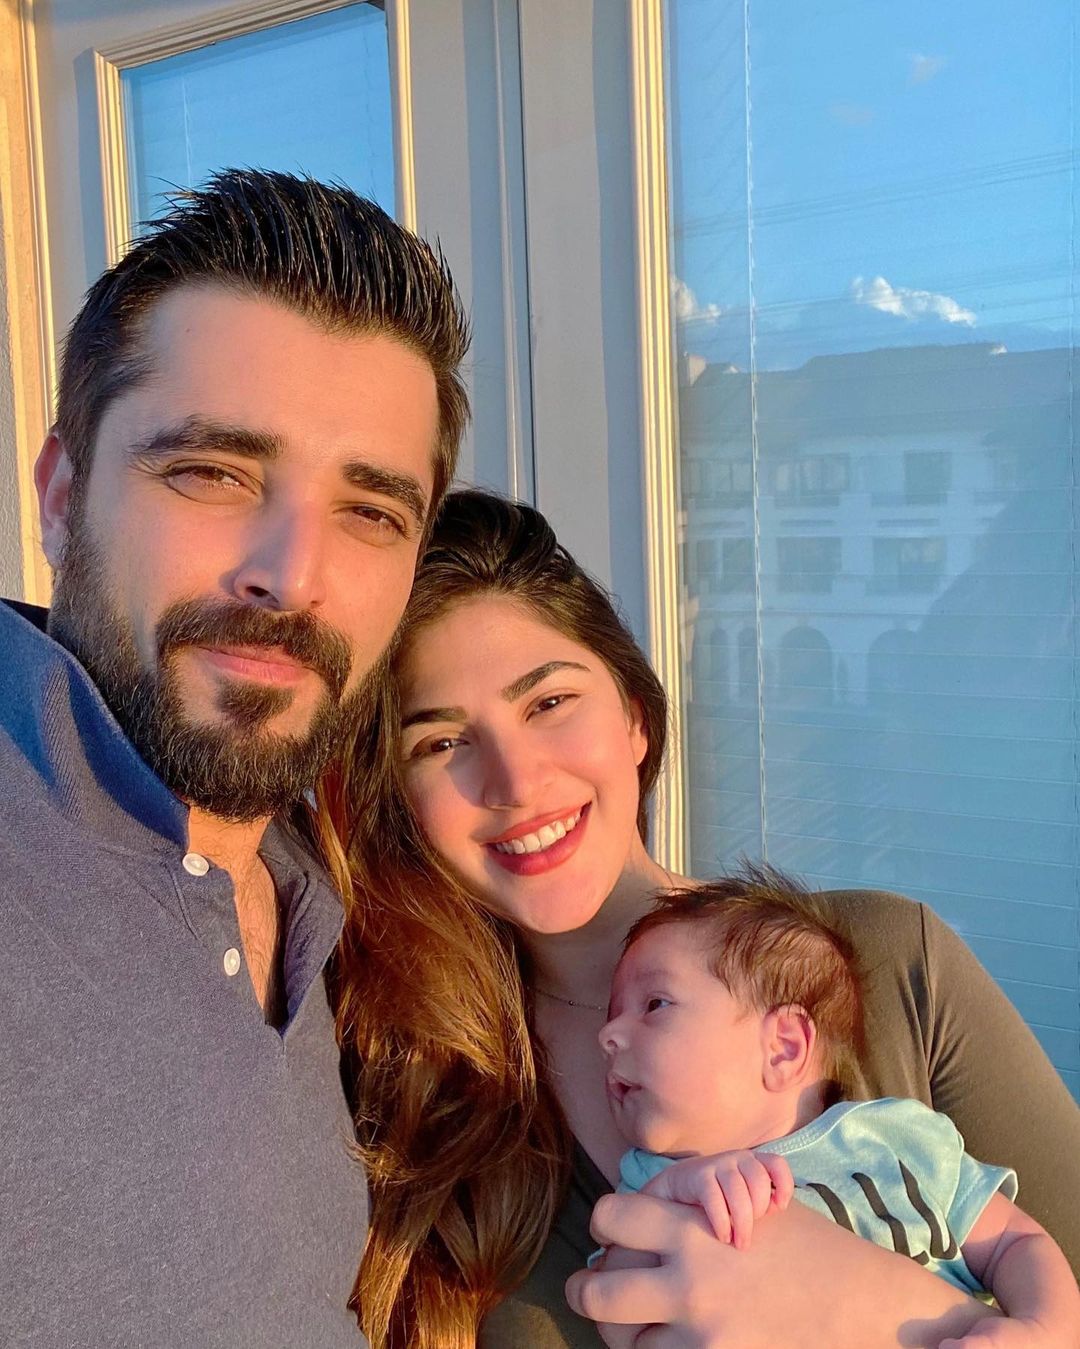 Hamza Abbasi and Naimal Khawar Latest Pictures with their Son